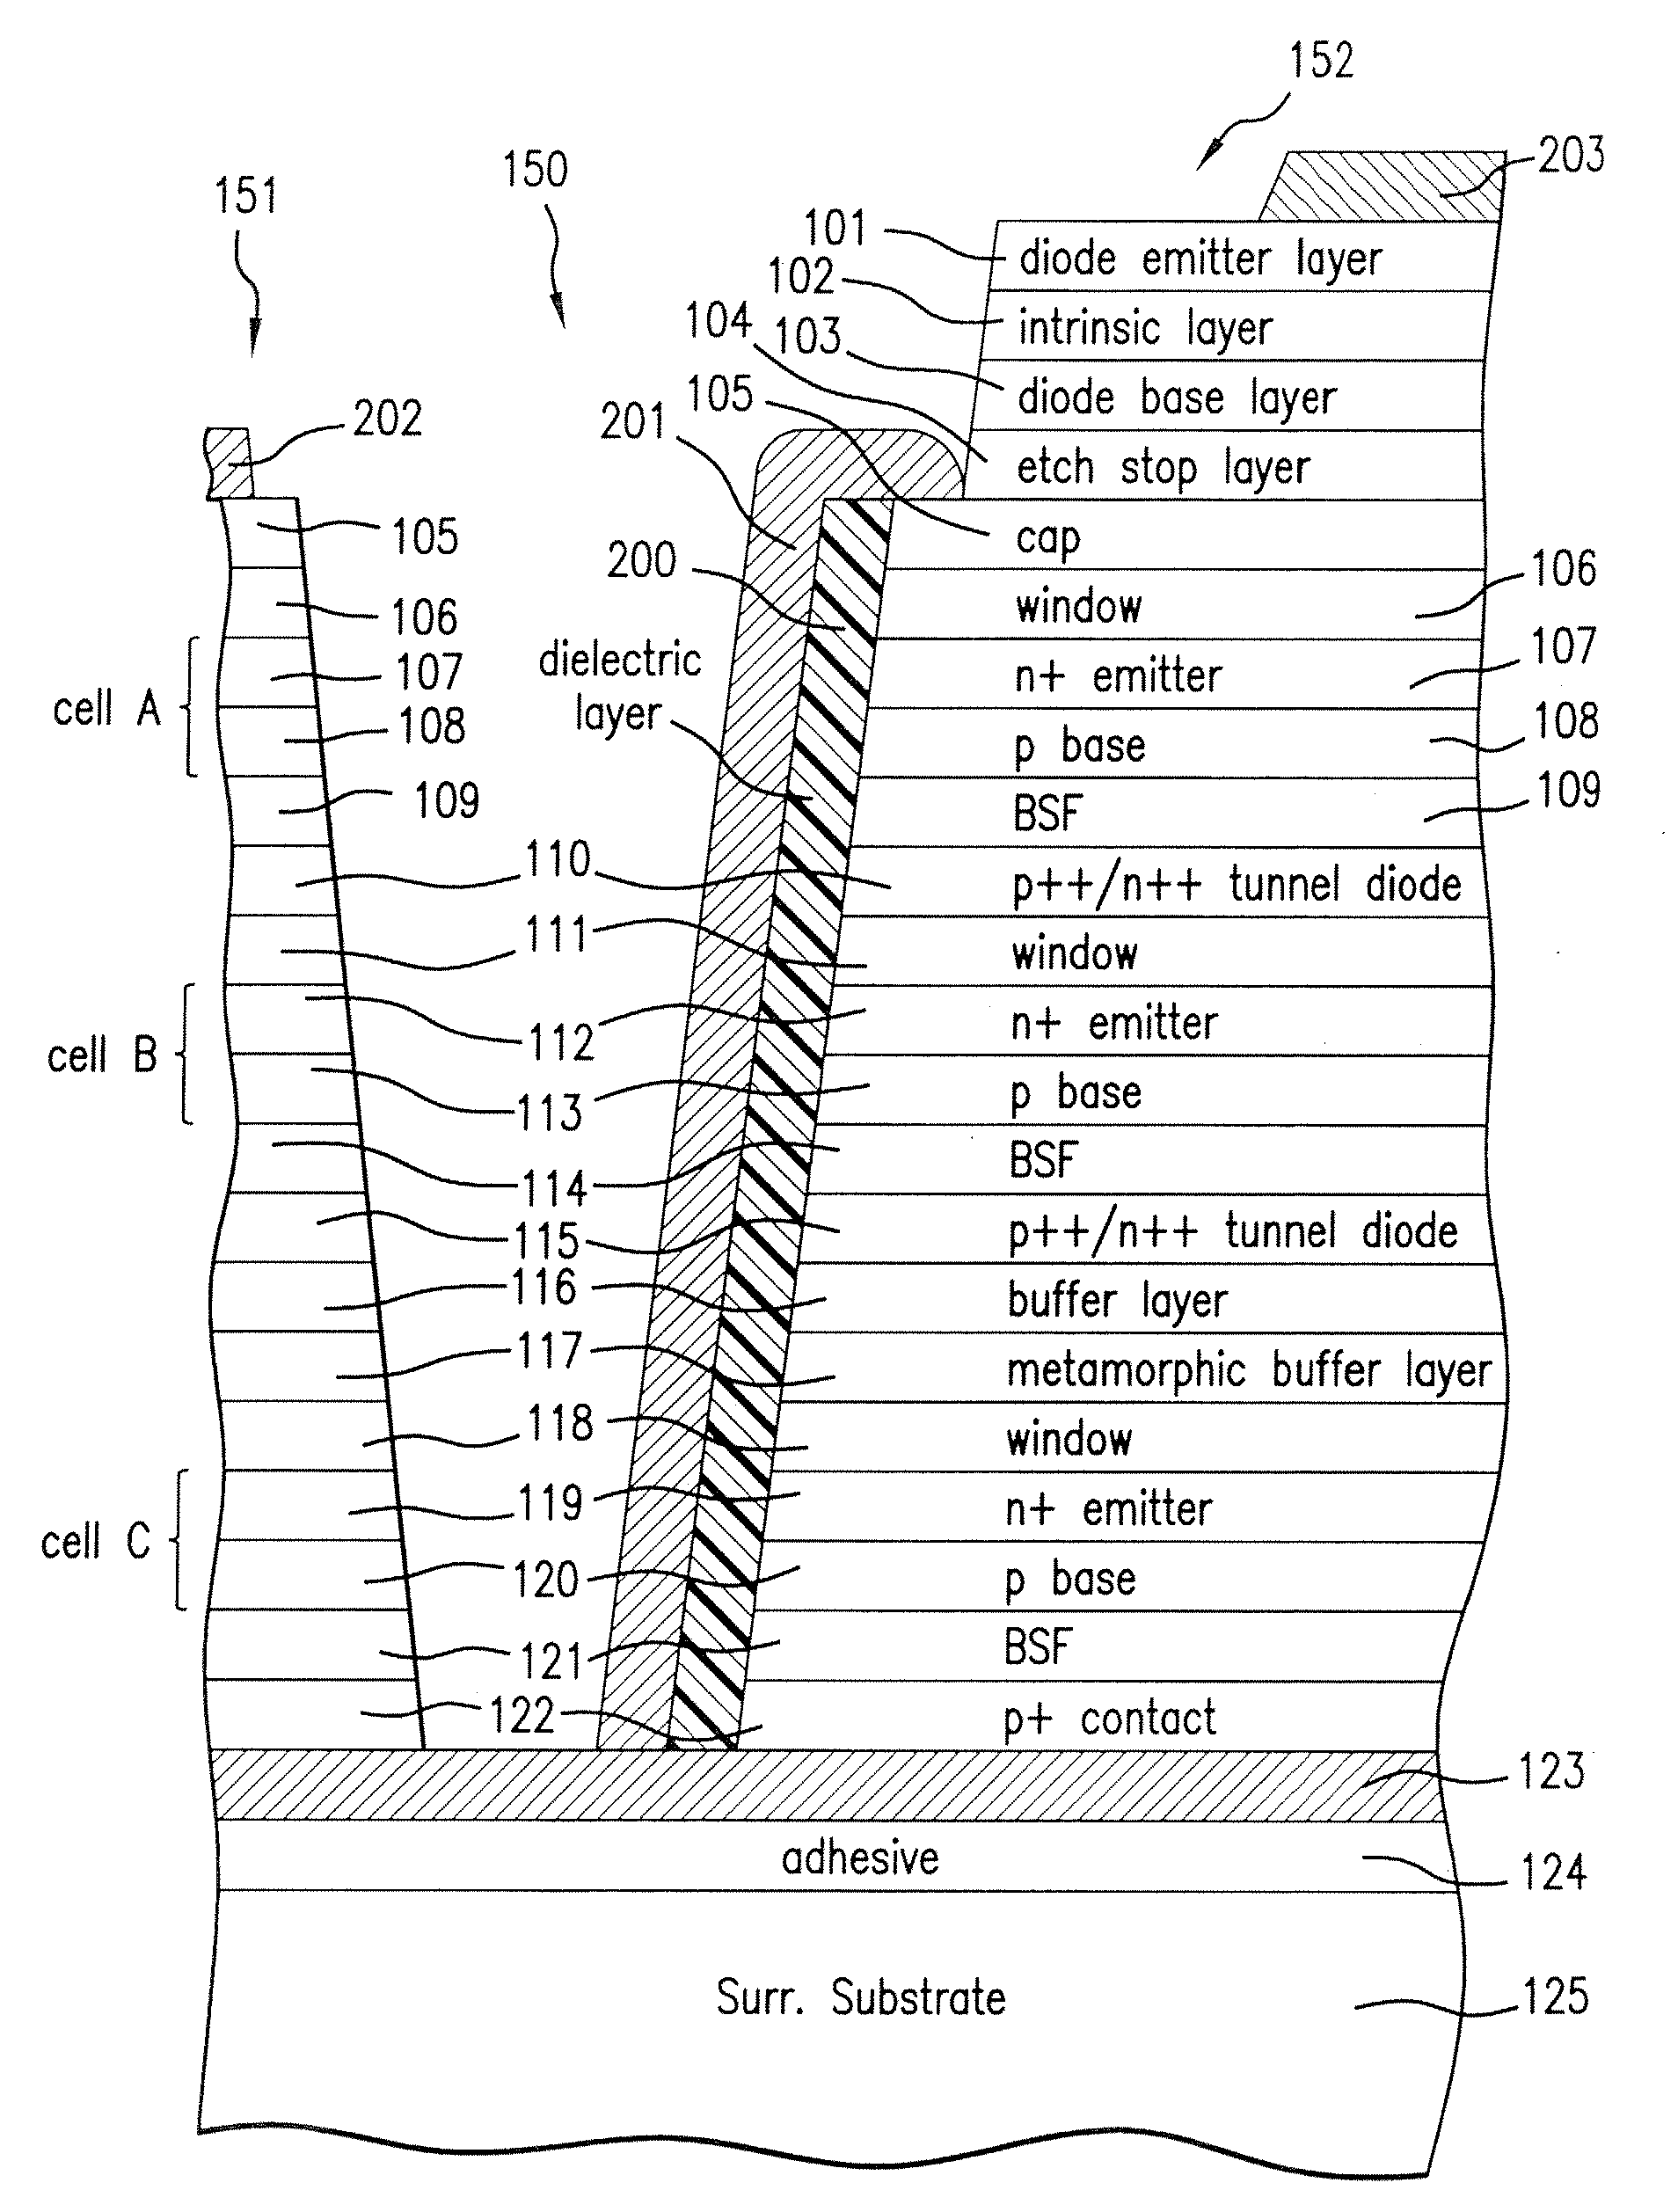 Inverted metamorphic solar cell with bypass diode